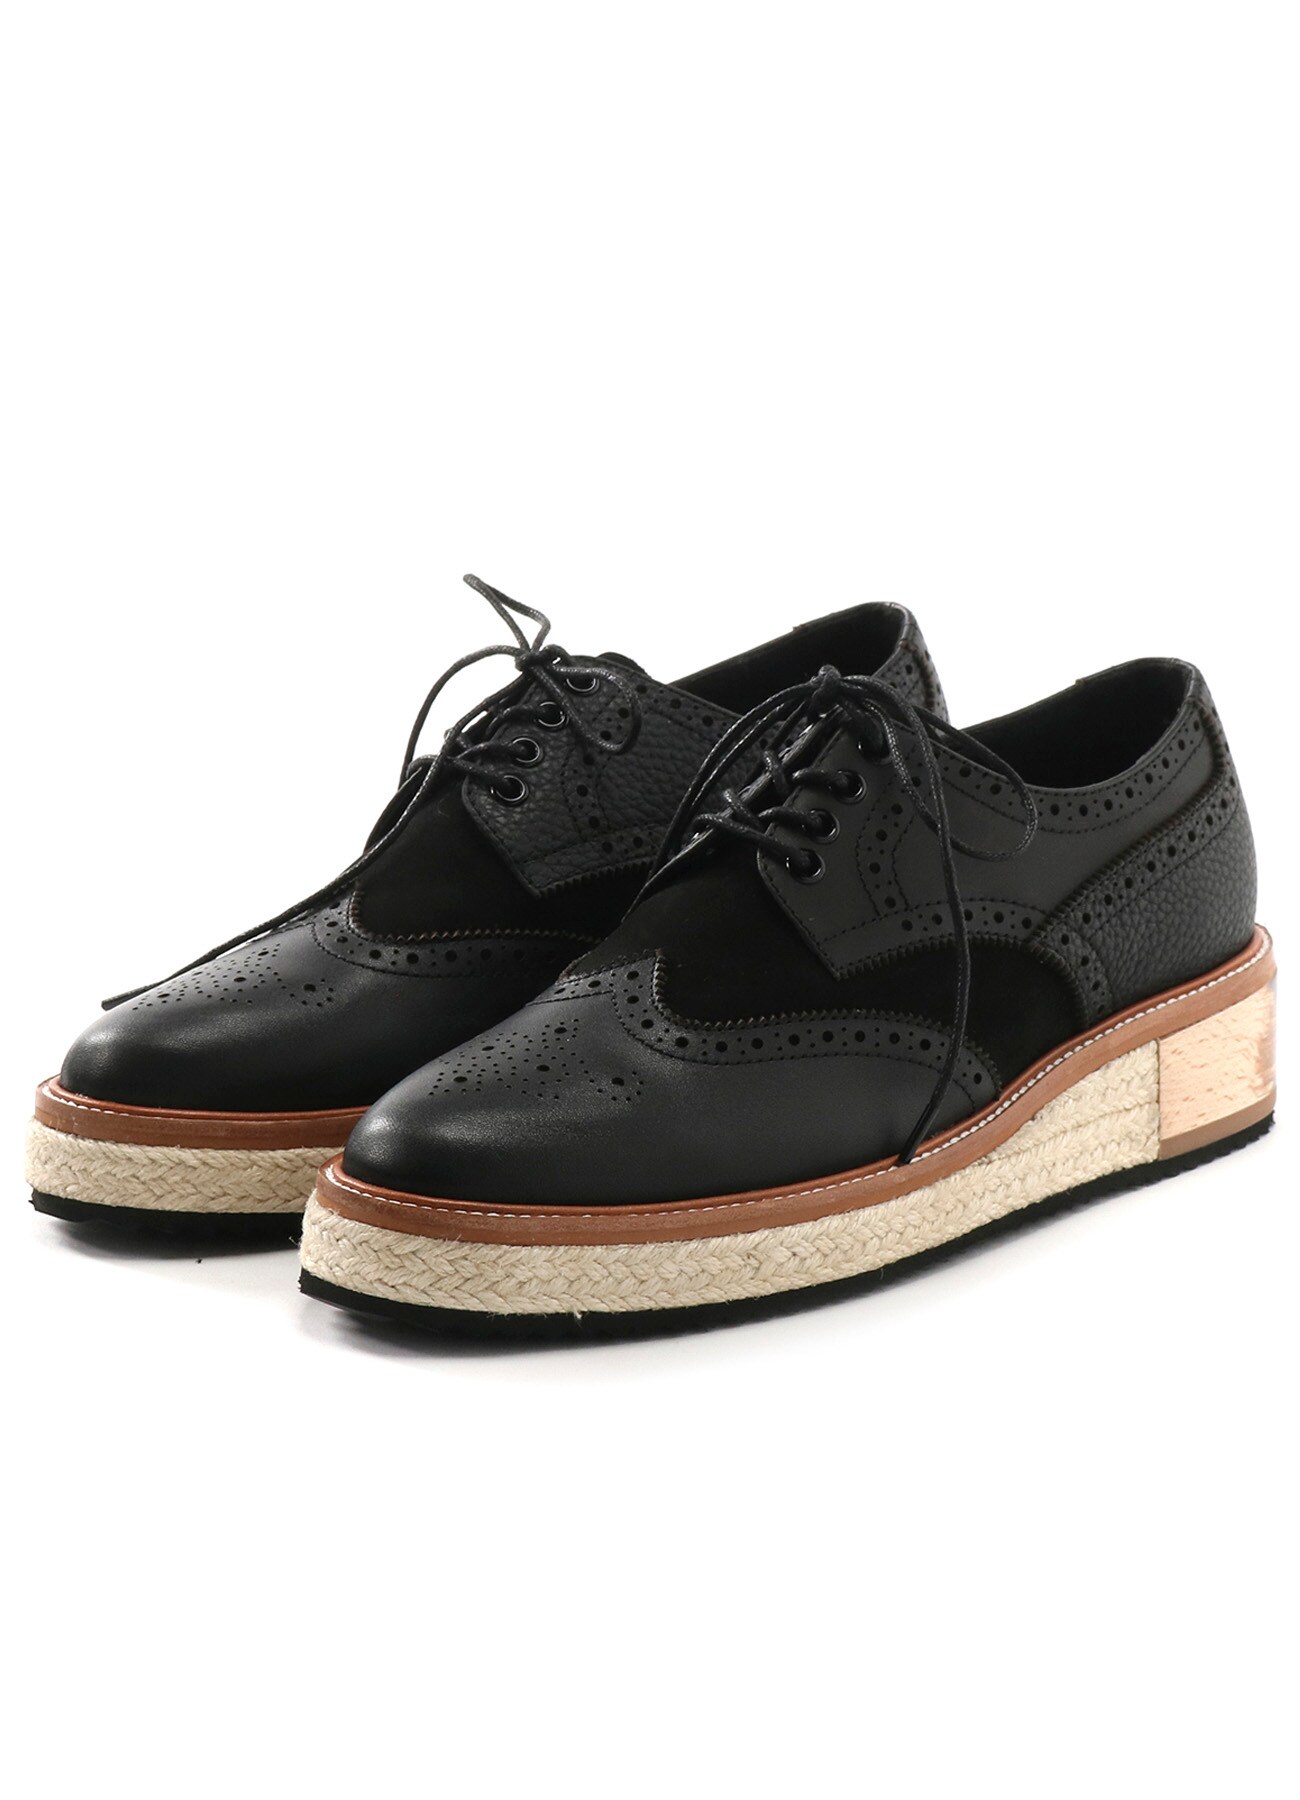 KAYONAKAMURAbyY's COMBI MULTI MATERIAL LEATHER DECO HOLE LOW SHOES